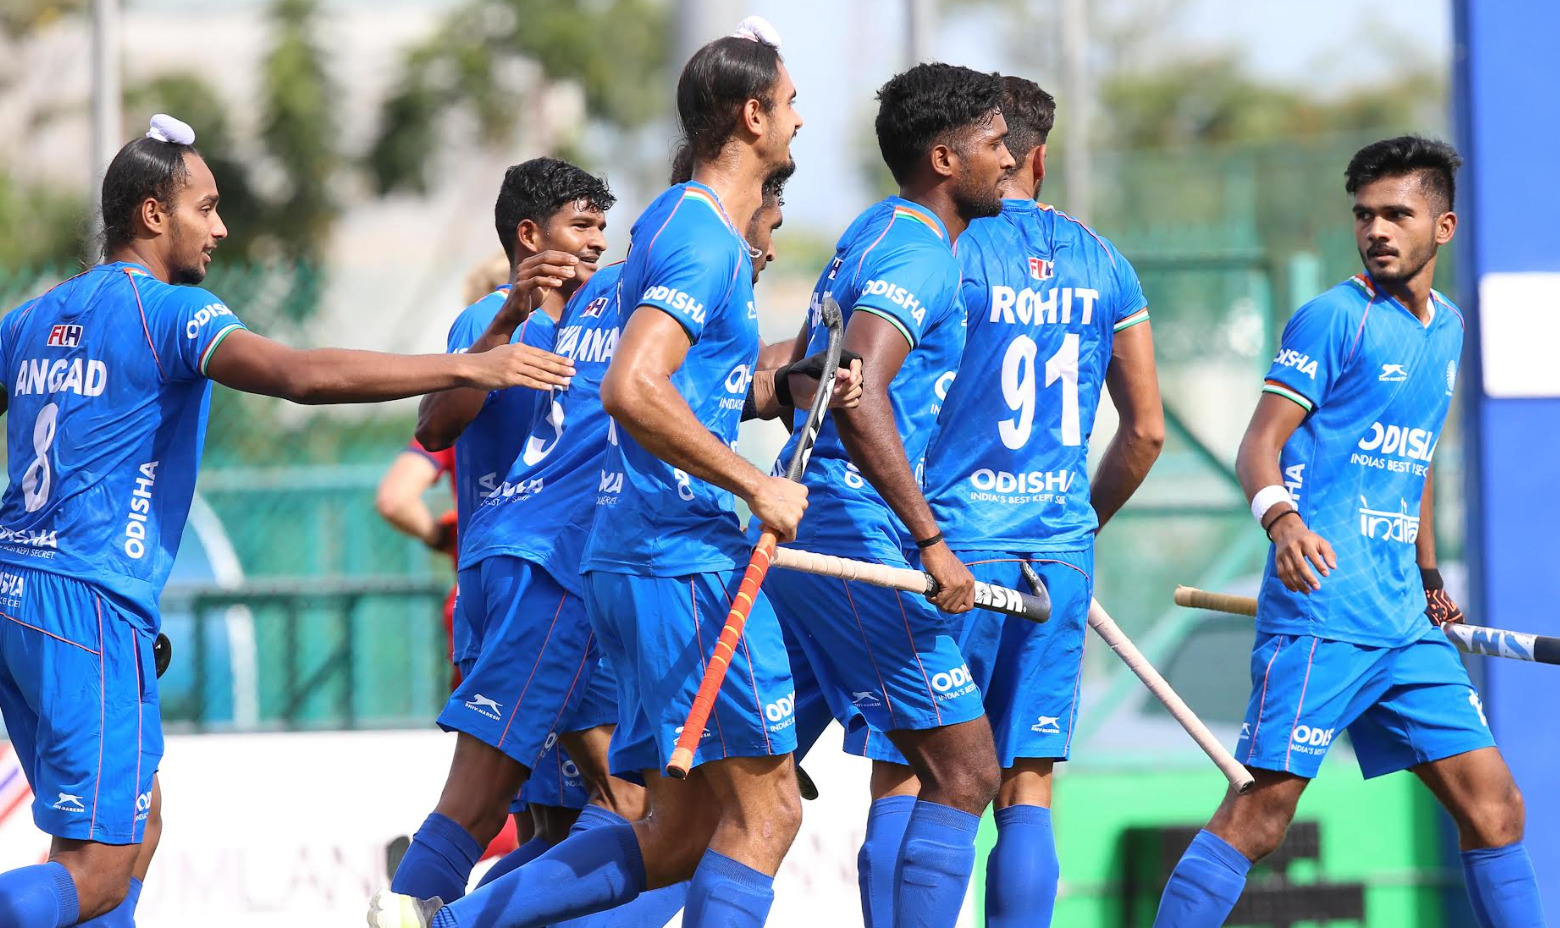 Sultan of Johor Cup India qualify for final after 55 draw with GBR